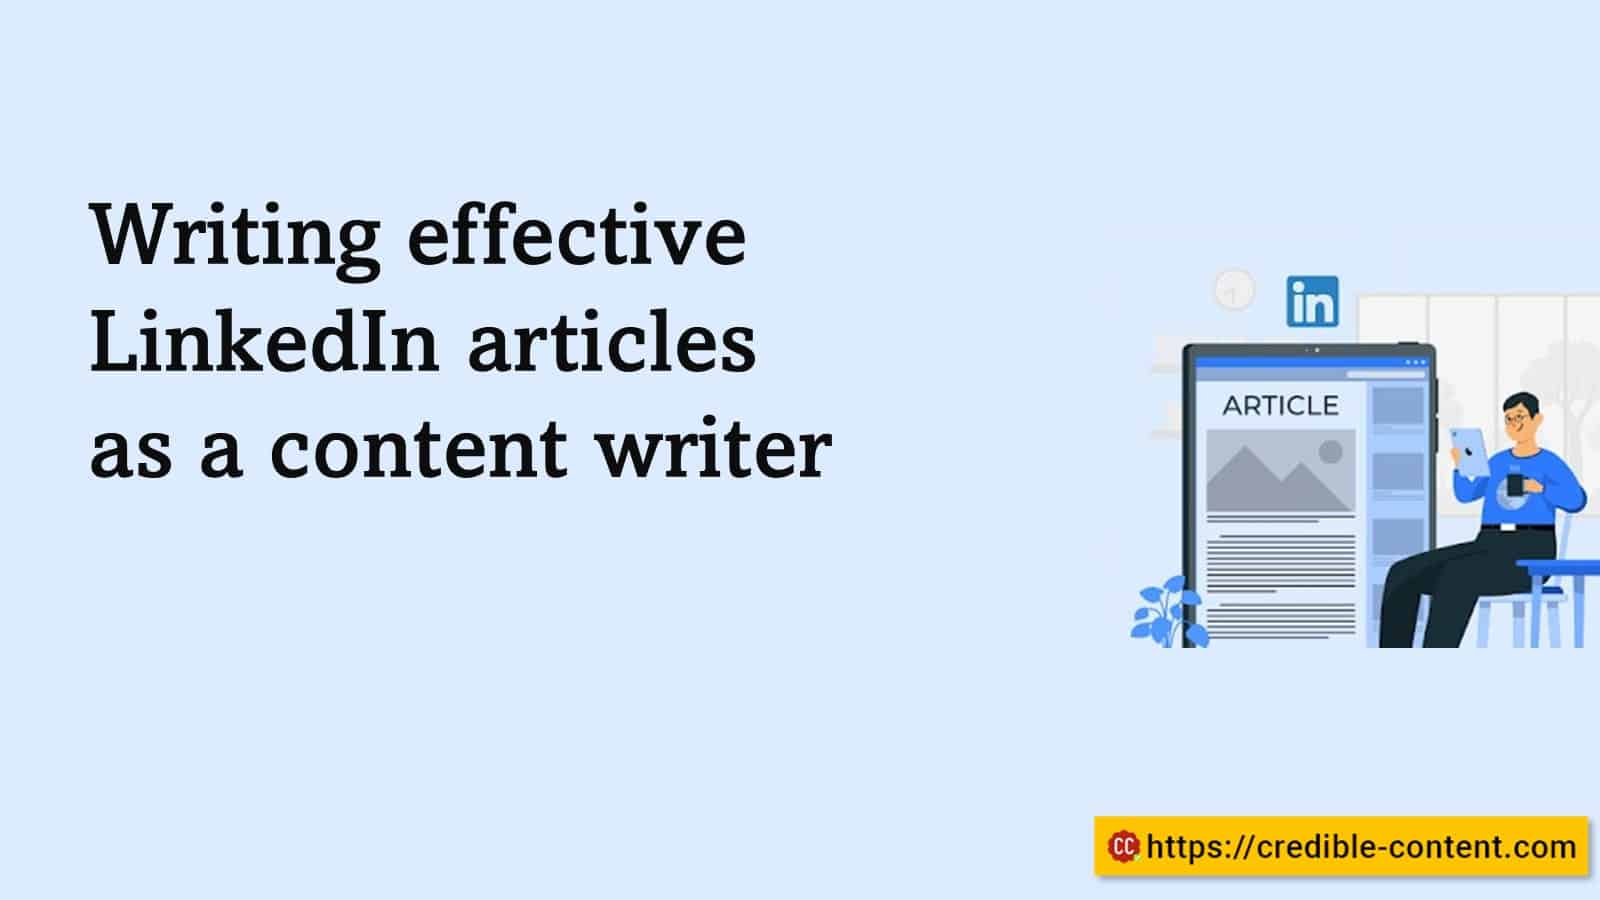 Writing effective LinkedIn articles as a content writer